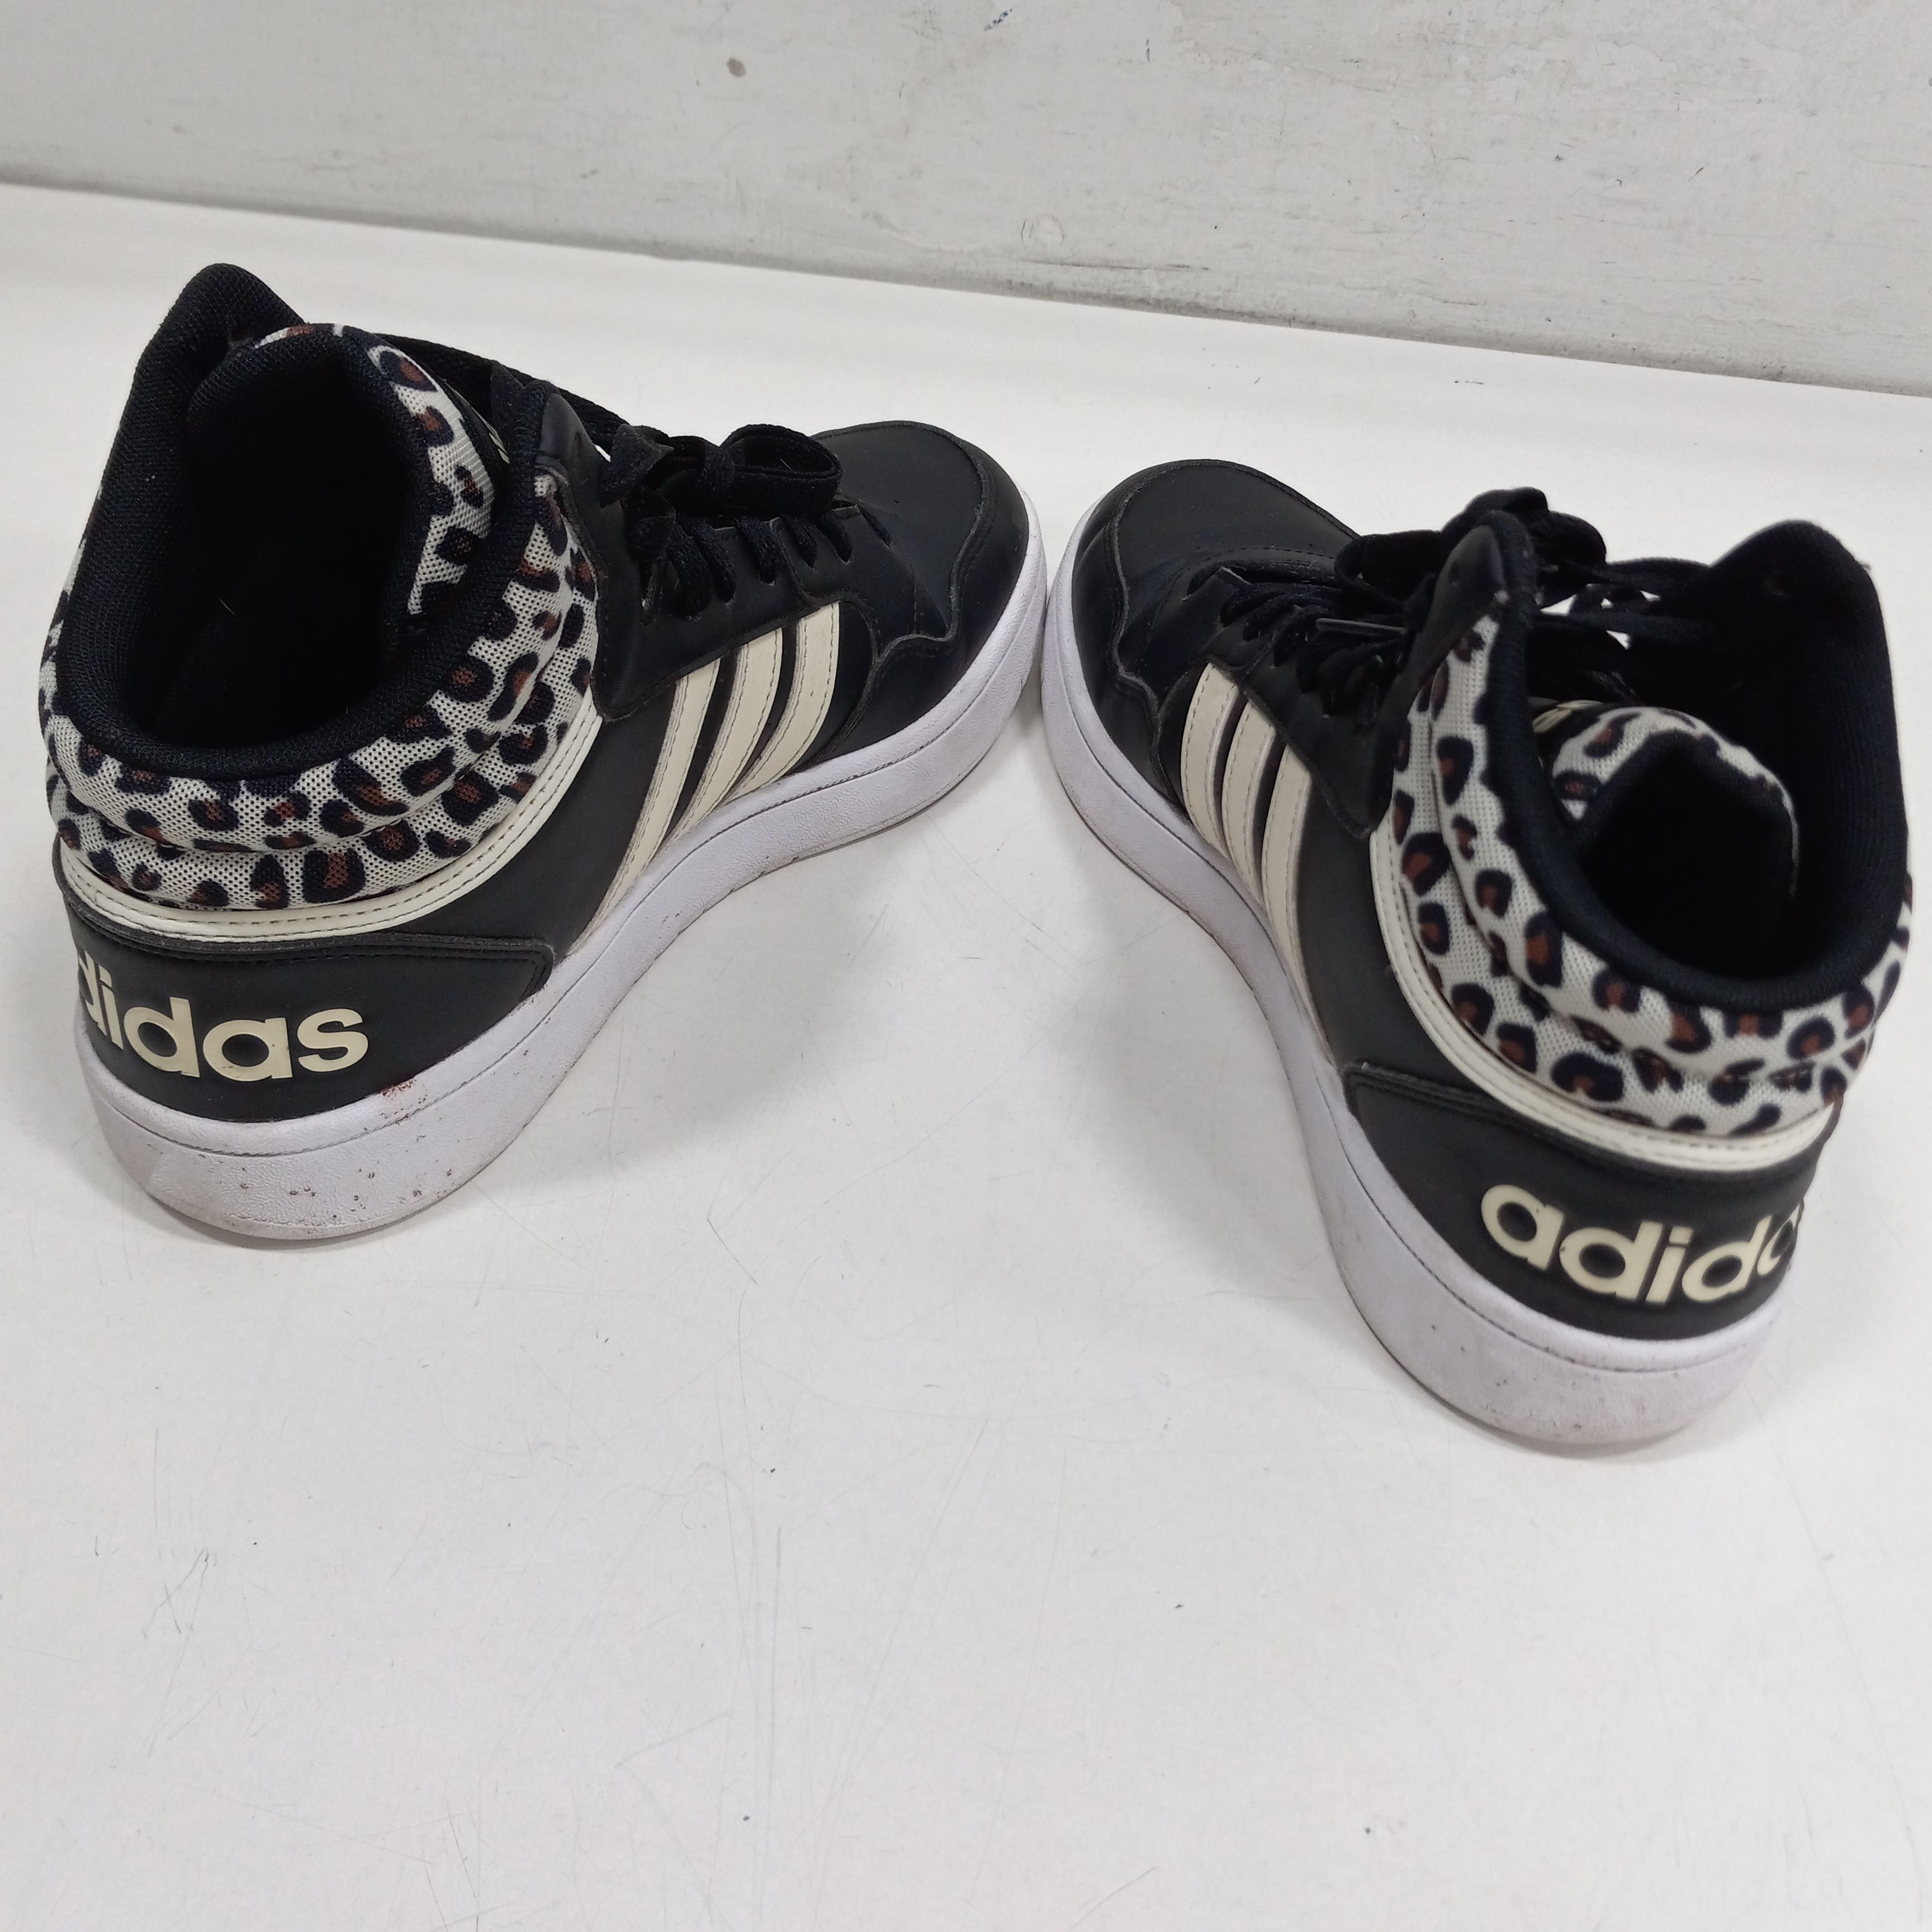 Leopard Adidas Sneakers at Nordstrom - The House of Sequins | Fashion  shoes, Outfit shoes, Crazy shoes